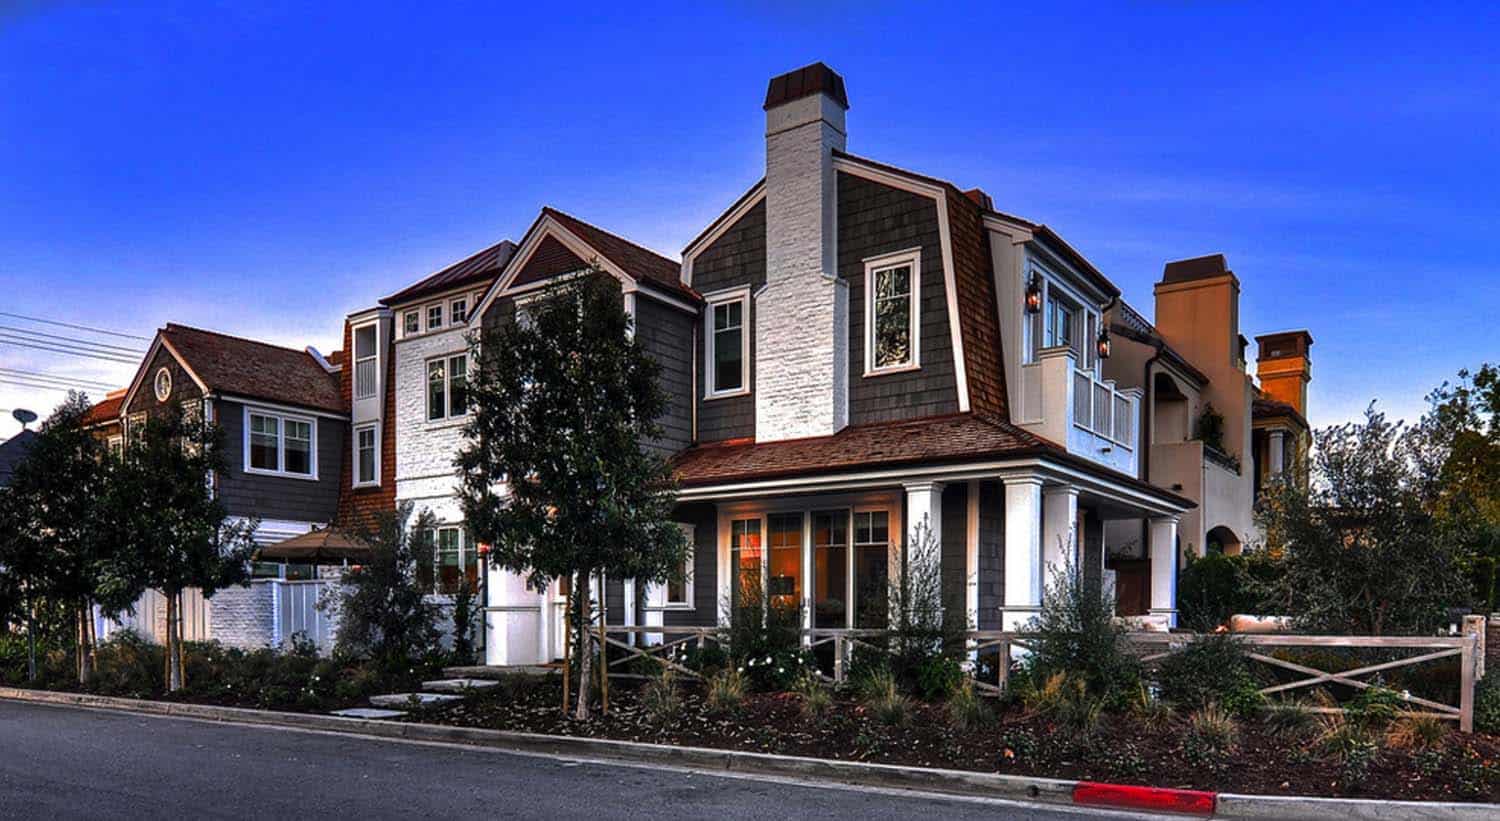 coastal-home-traditional-styling-exterior